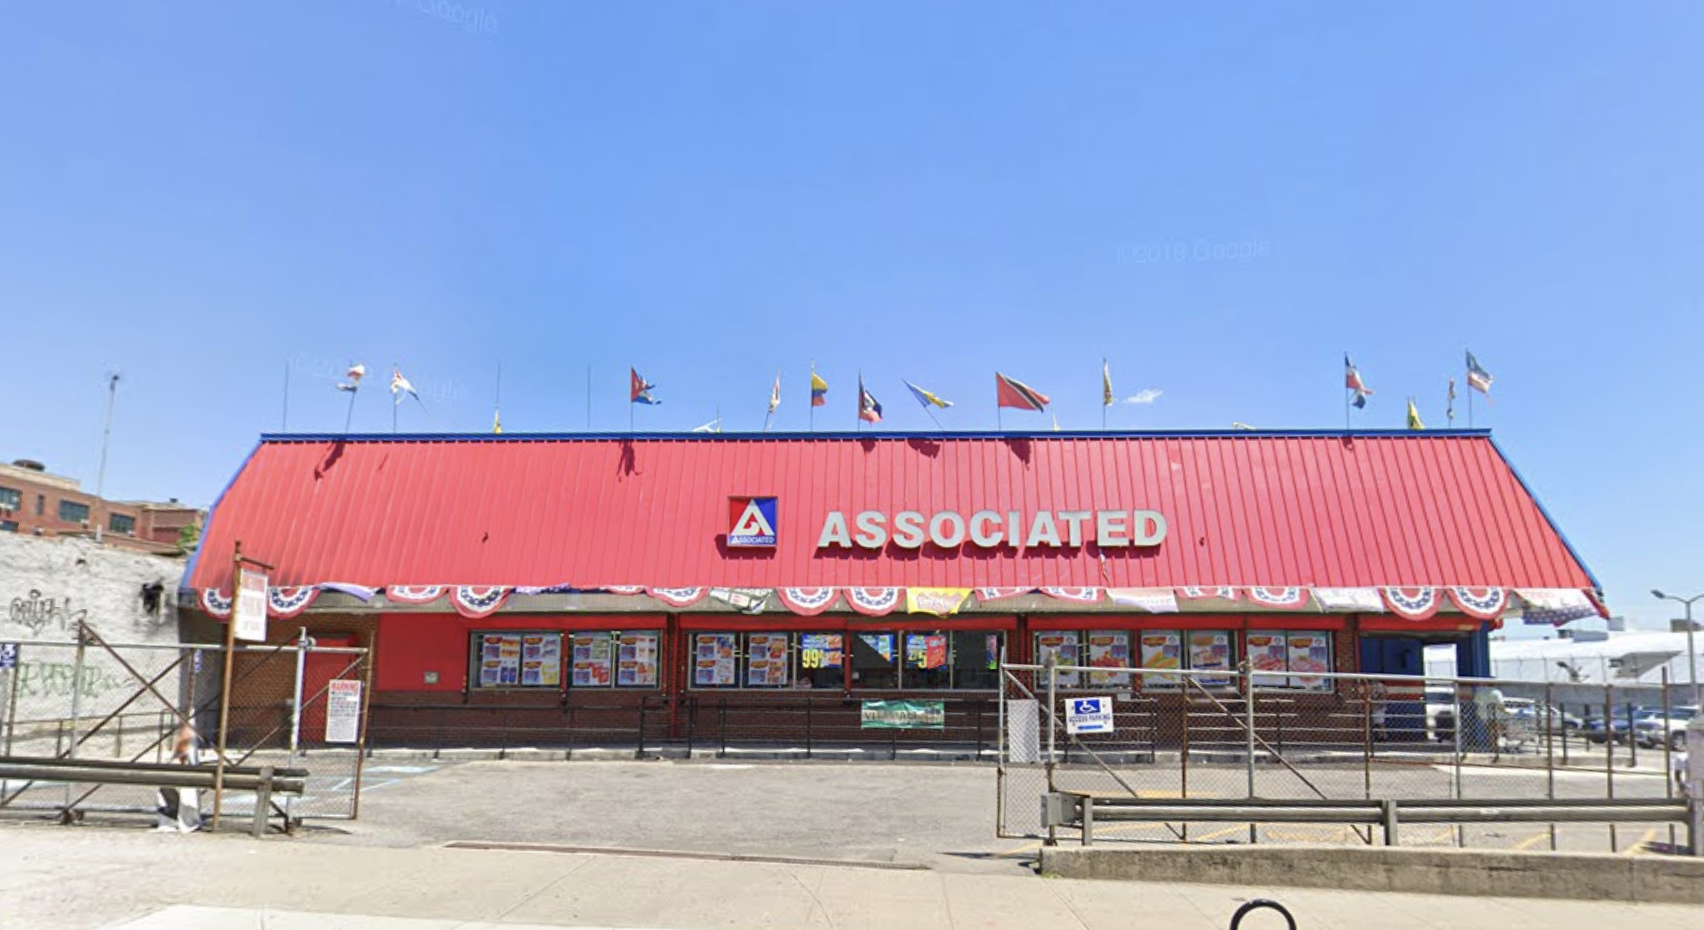 The exterior of the Nostrand Avenue Associated supermarket, which has a red roof